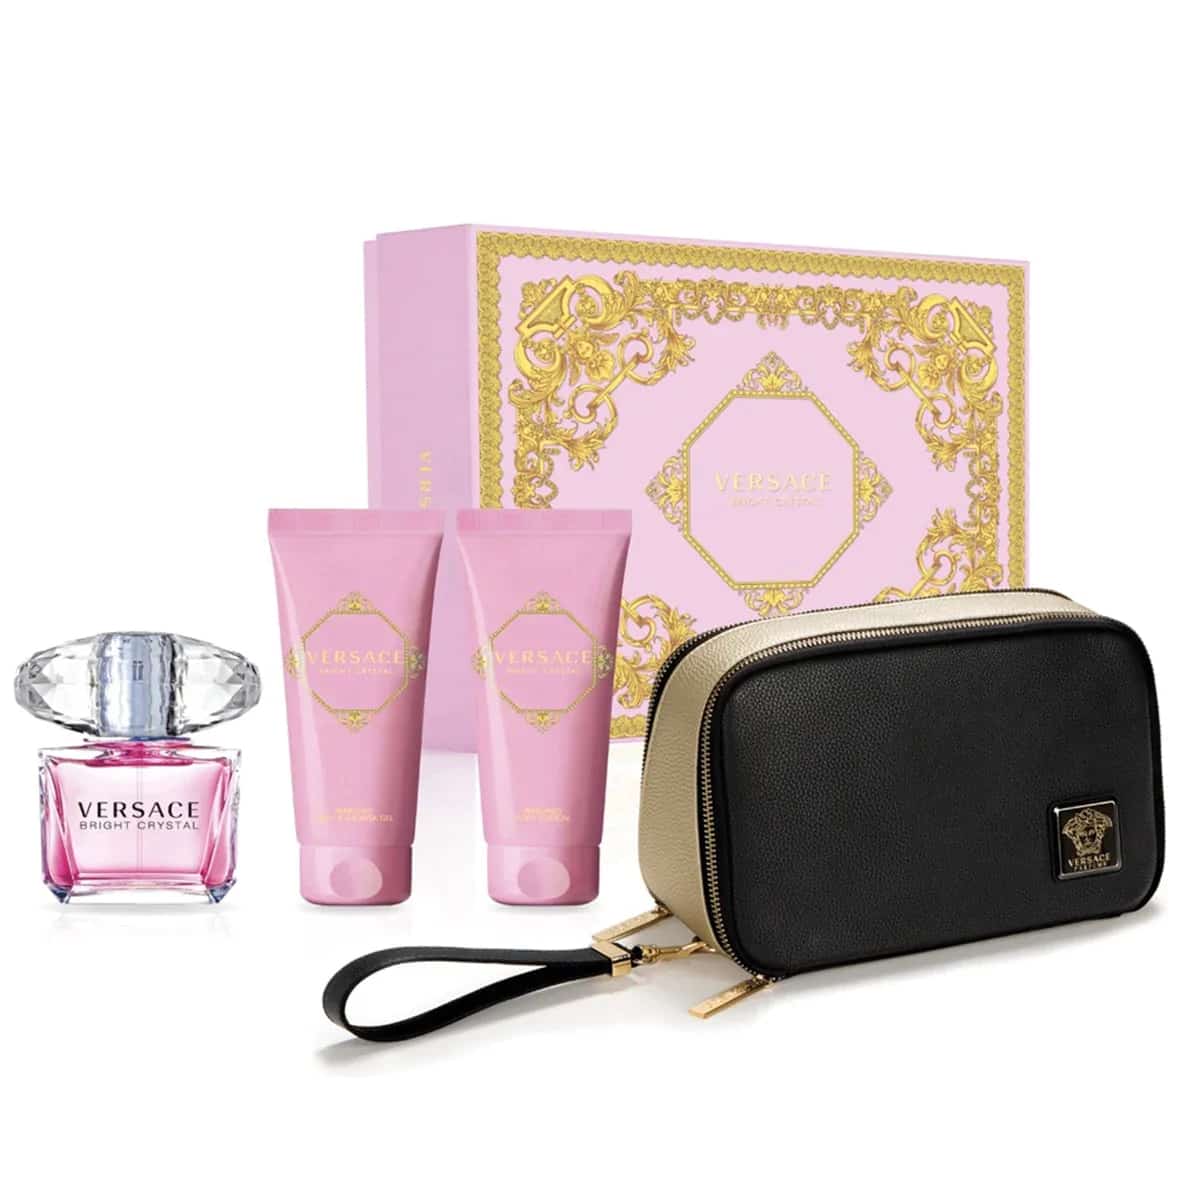 Versace Bright Crystal 4 pcs EDT 3.0 oz Gift Set for Women